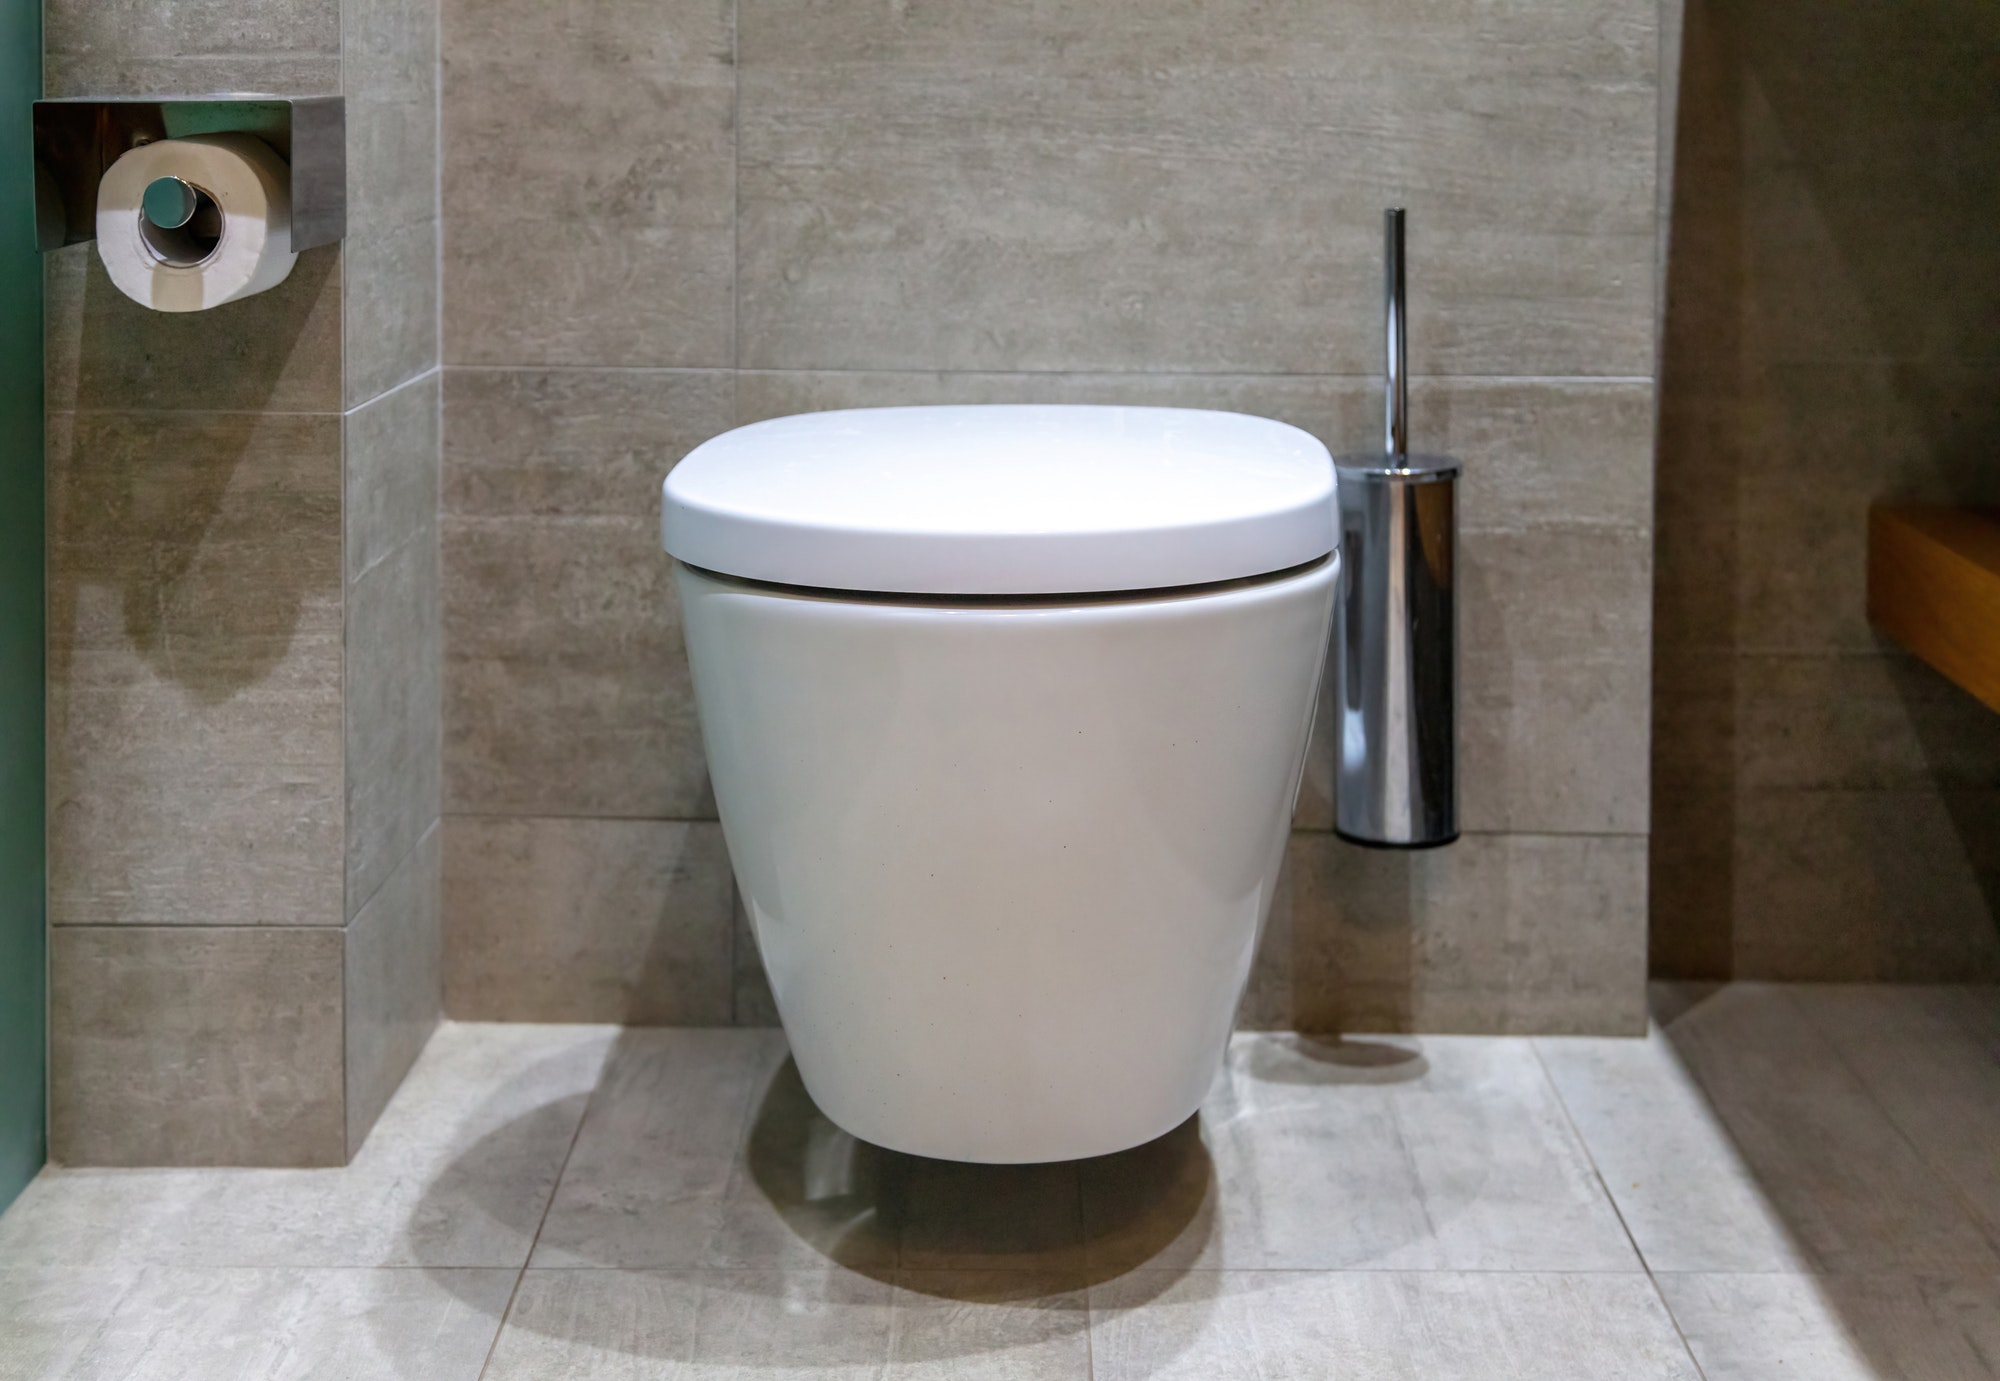 Modern toilet interior design, hanging toilet bowl and brush, tiled walls and floor.